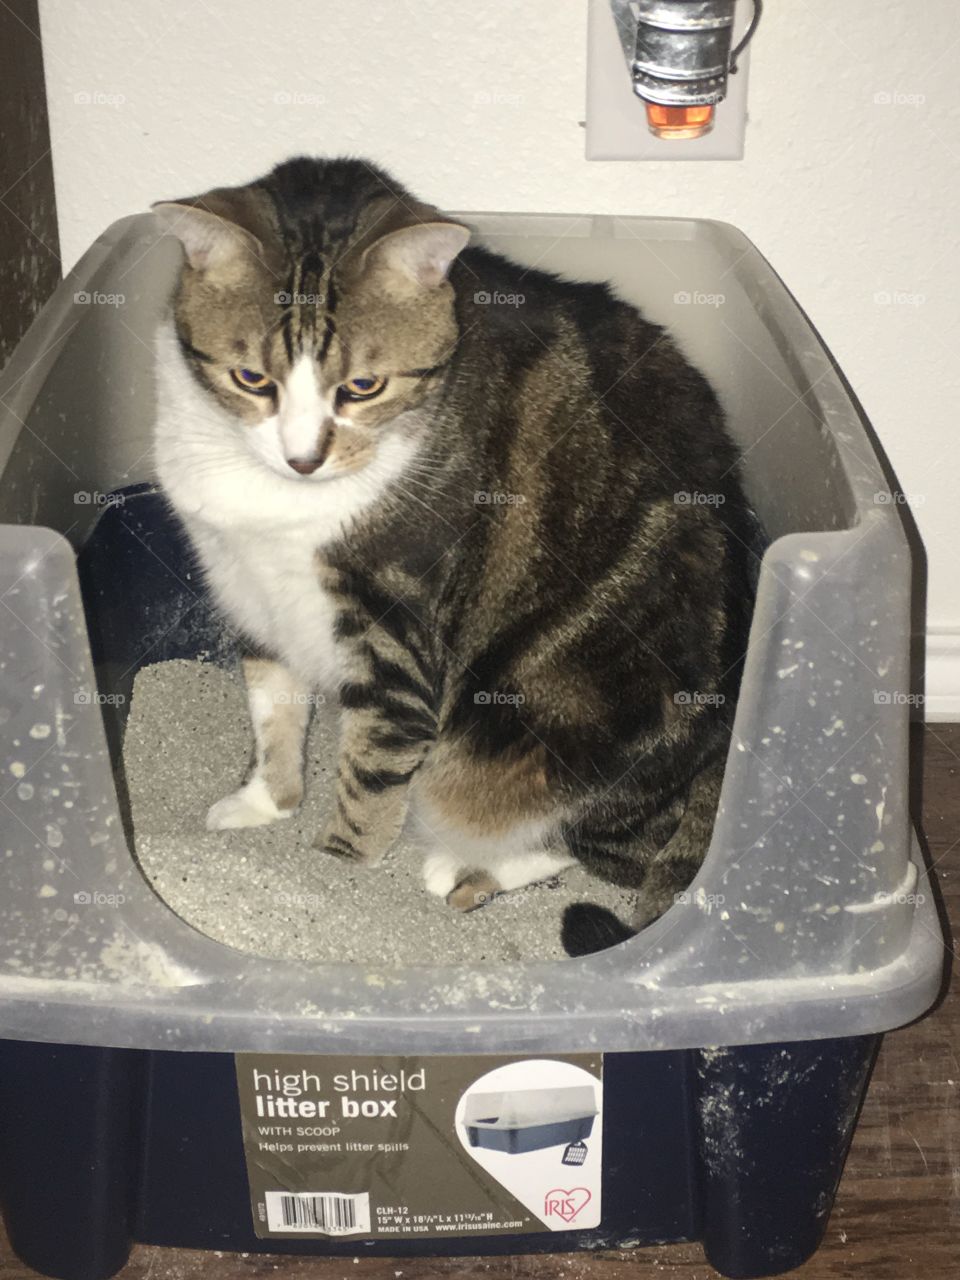 sitting in his litter box